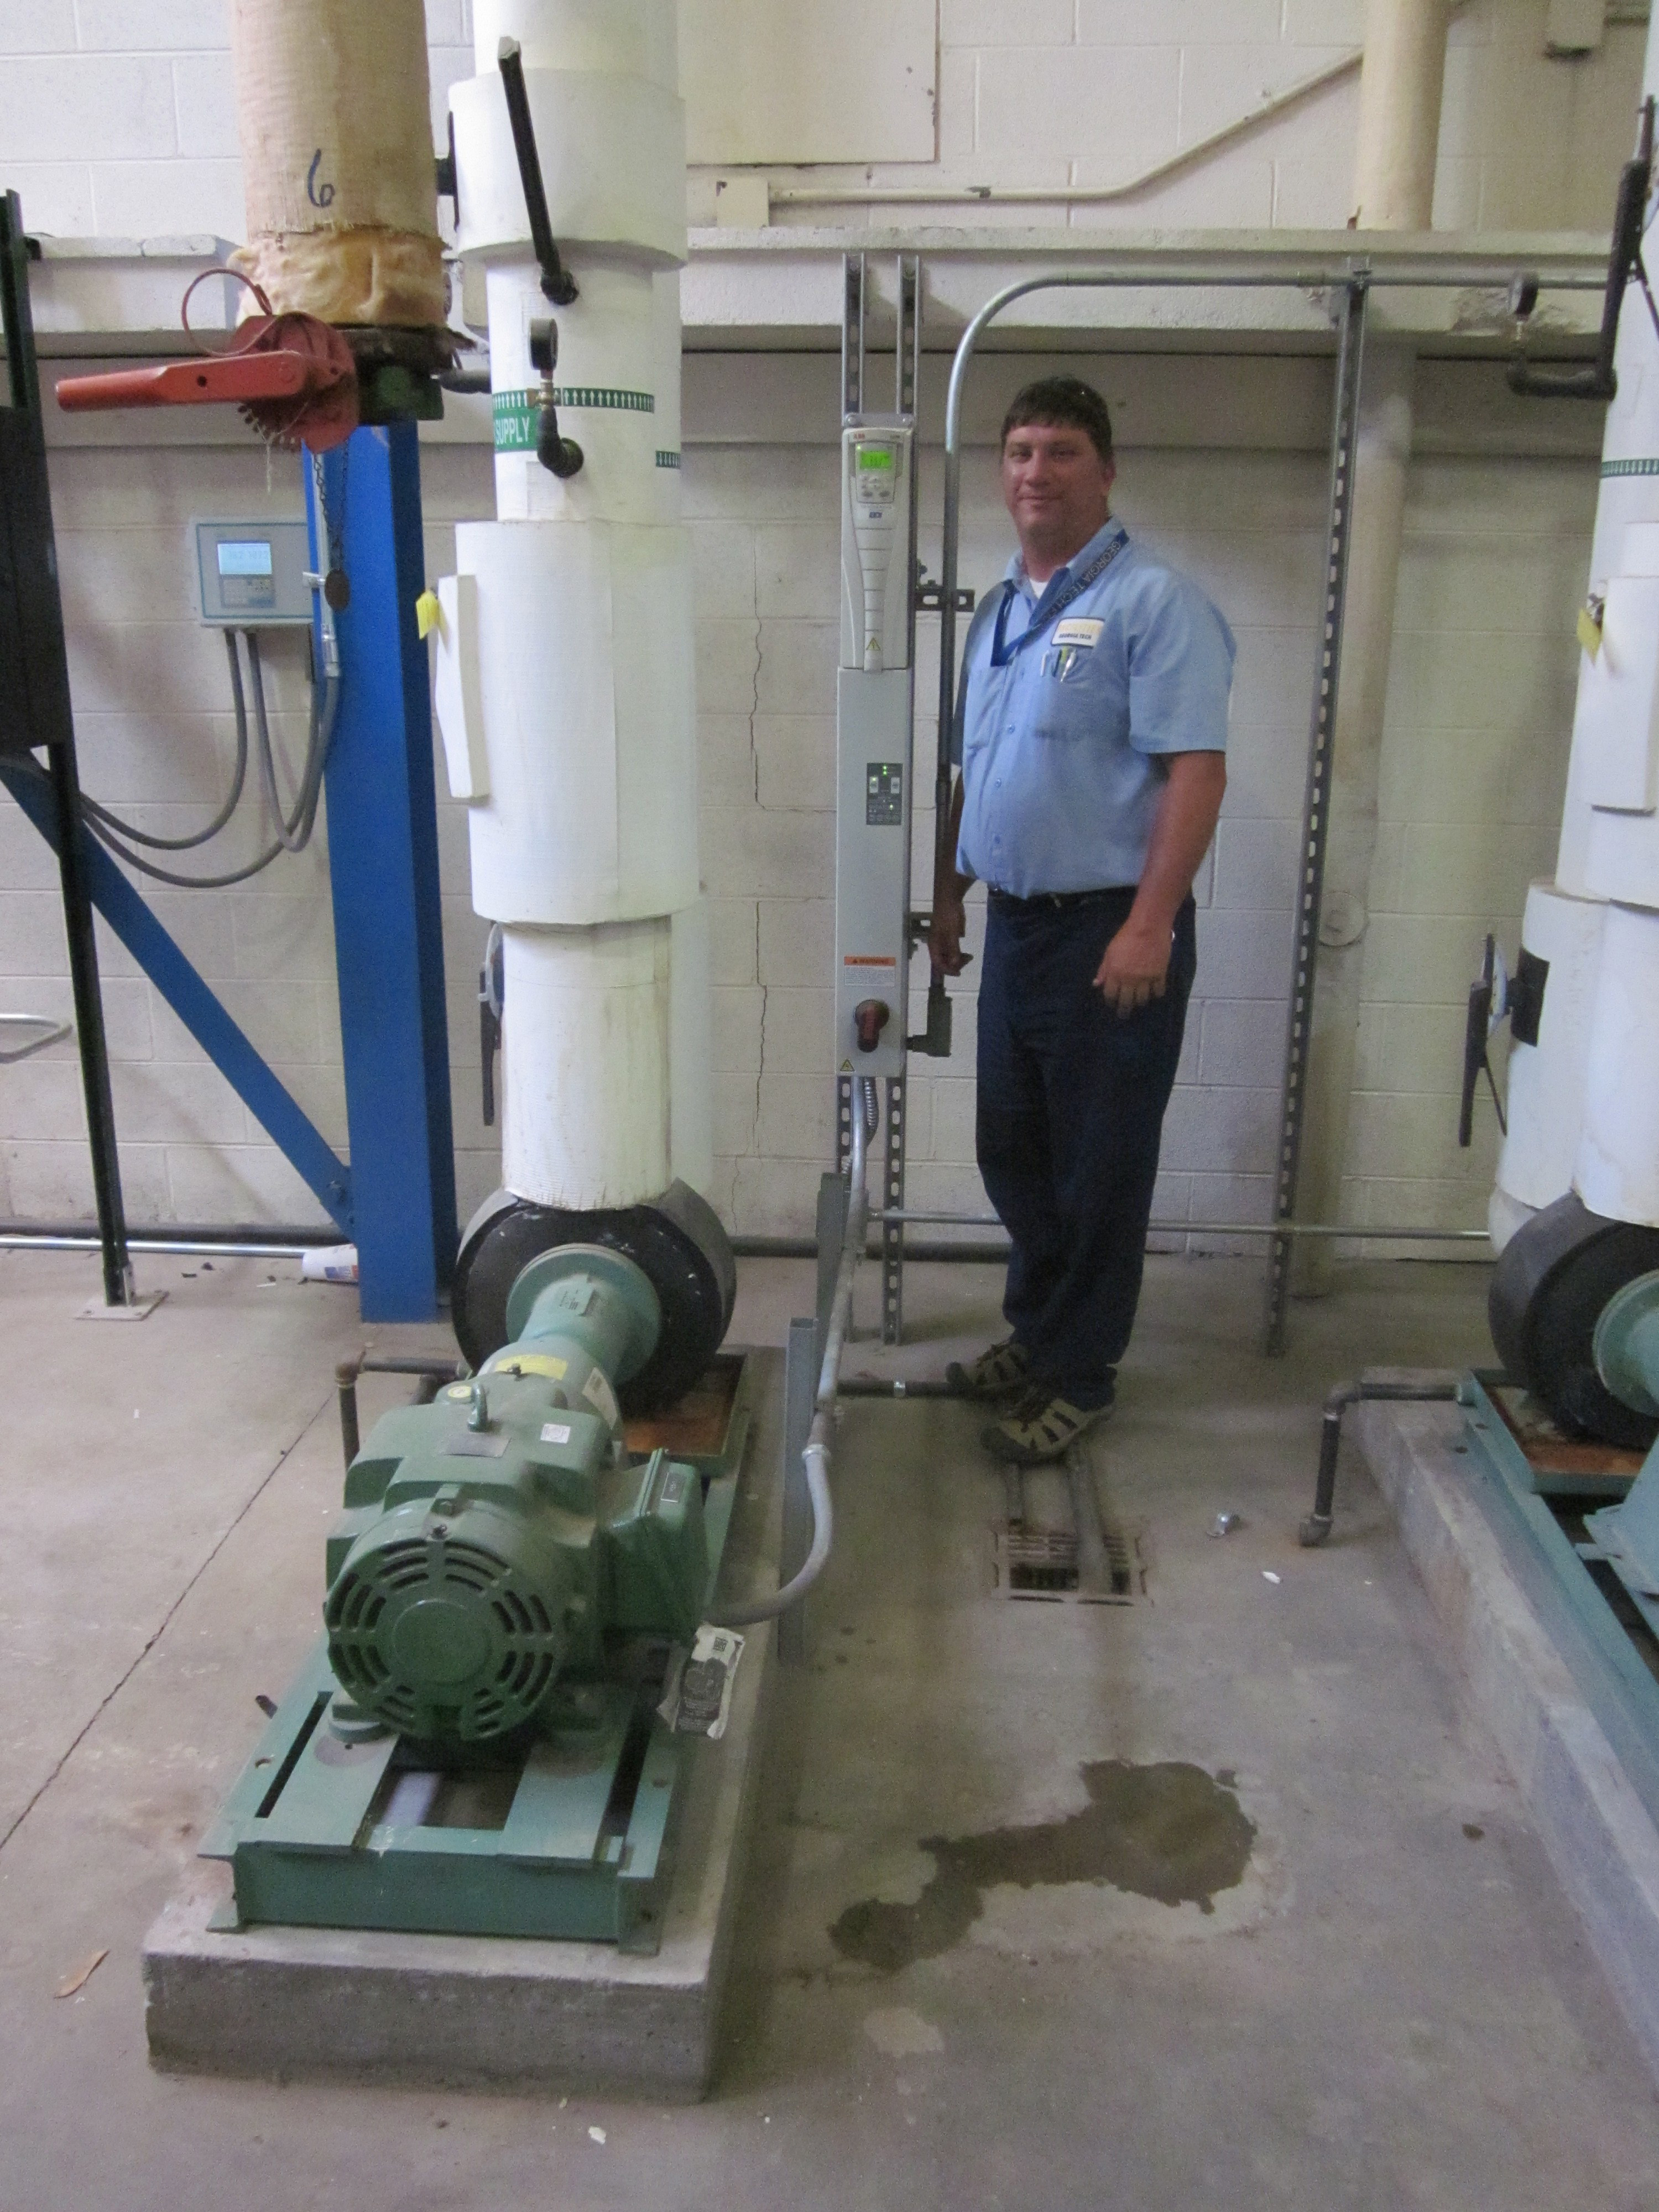 John McElreath, a Facilities electrician, with a variable frequency drive adjacent to the motor it controls.